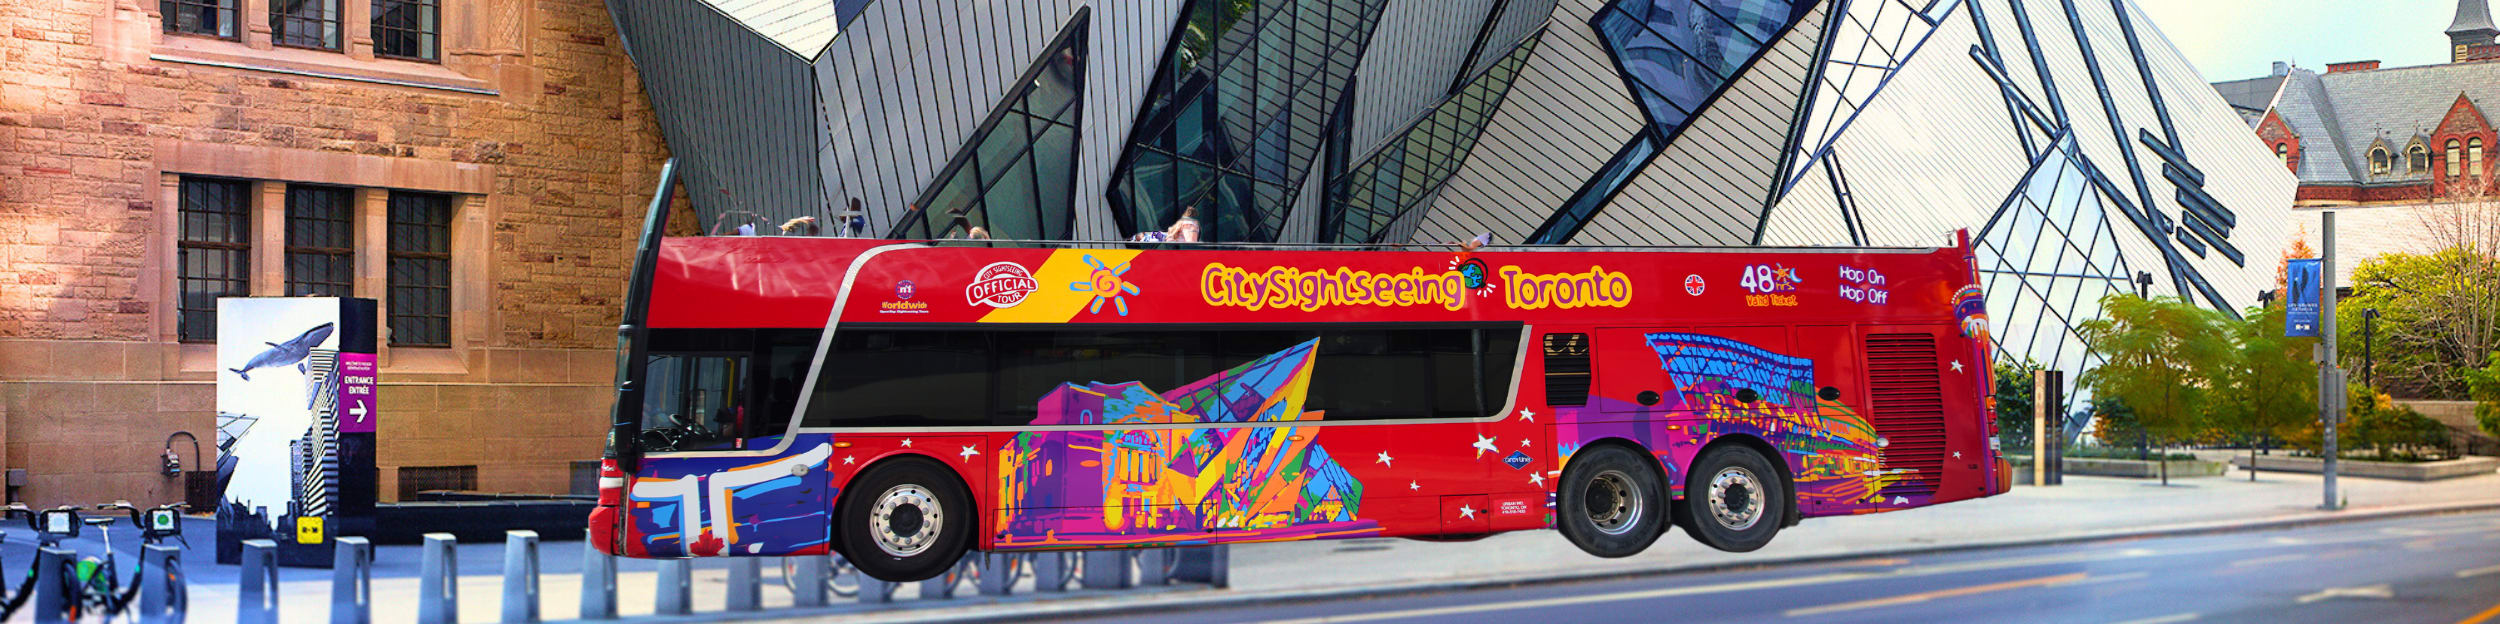 Red tour bus